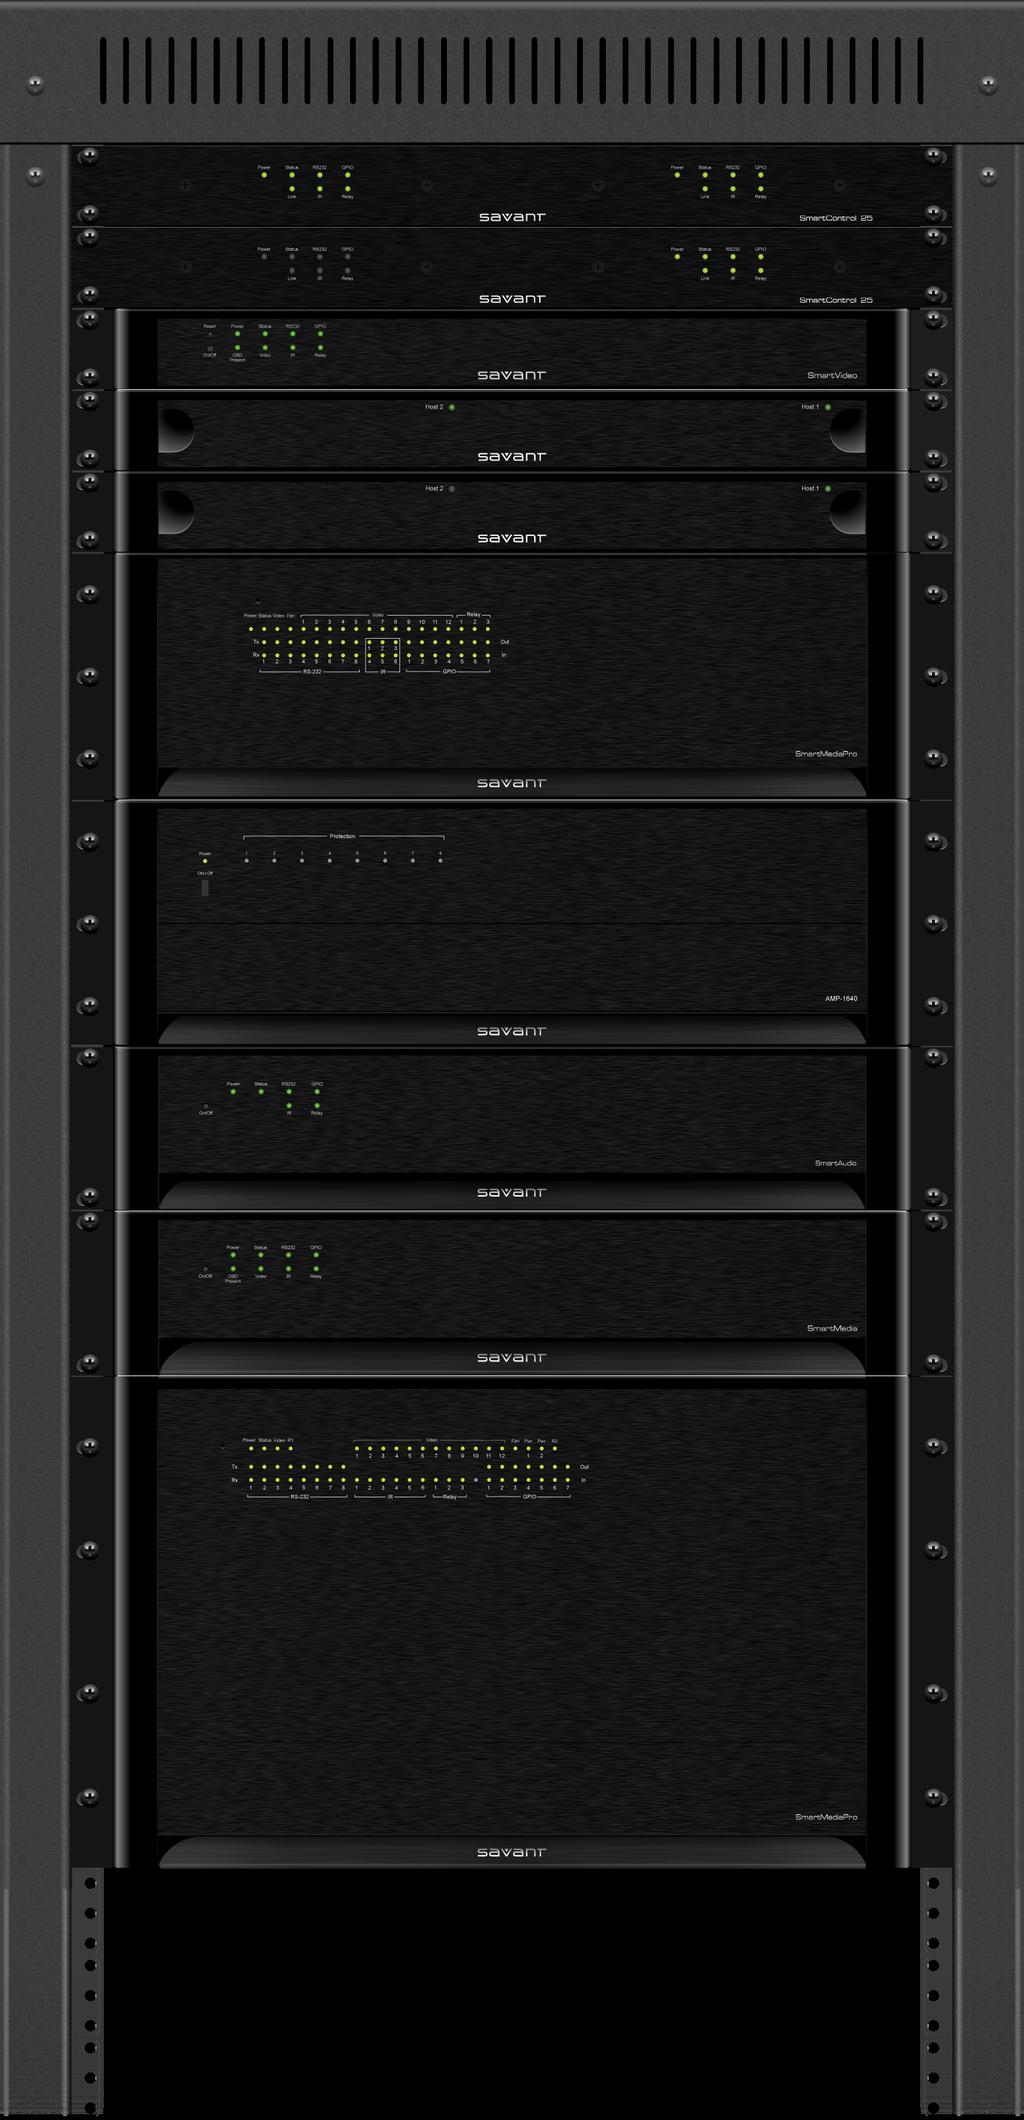 Specifications for Installing Device in Rack The SSV-000 can be mounted in a U-rack style enclosure. The next figure shows a partial view of a typical rack used to house an SSV-000 and other devices.